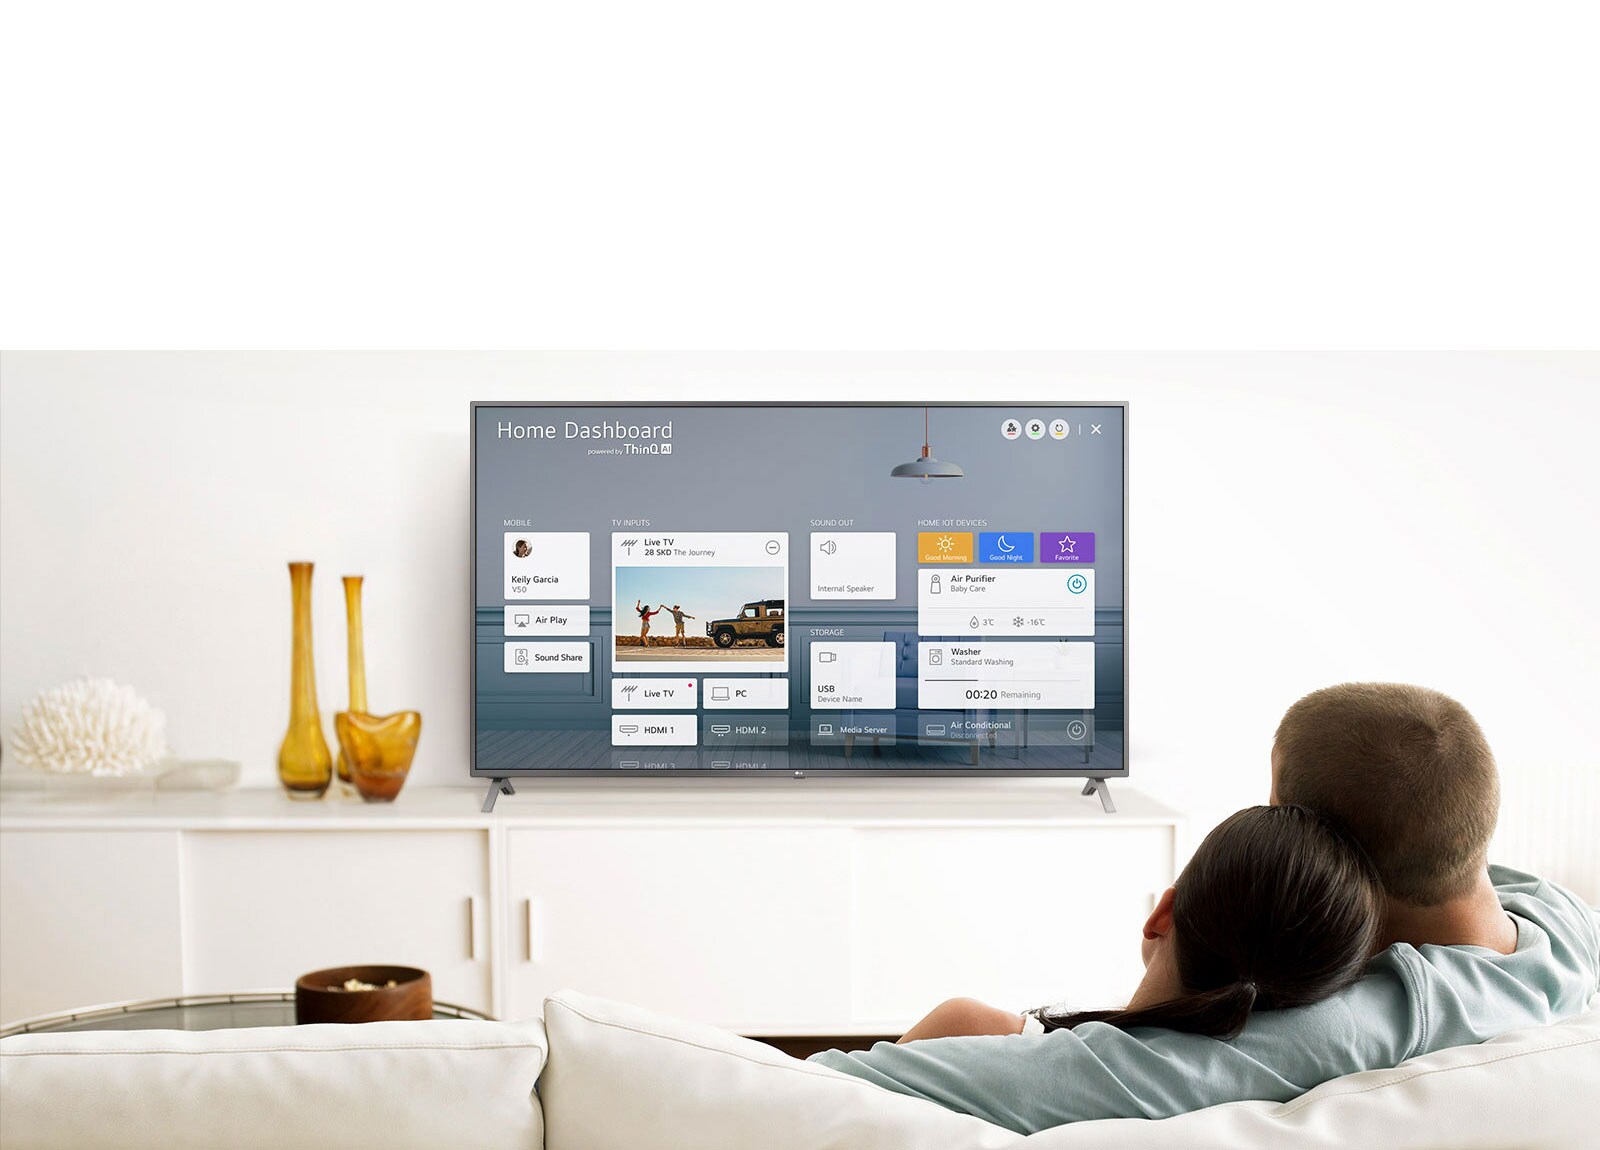 A men and women sitting on a sofa in the living room with the Home Dashboard on the TV screen